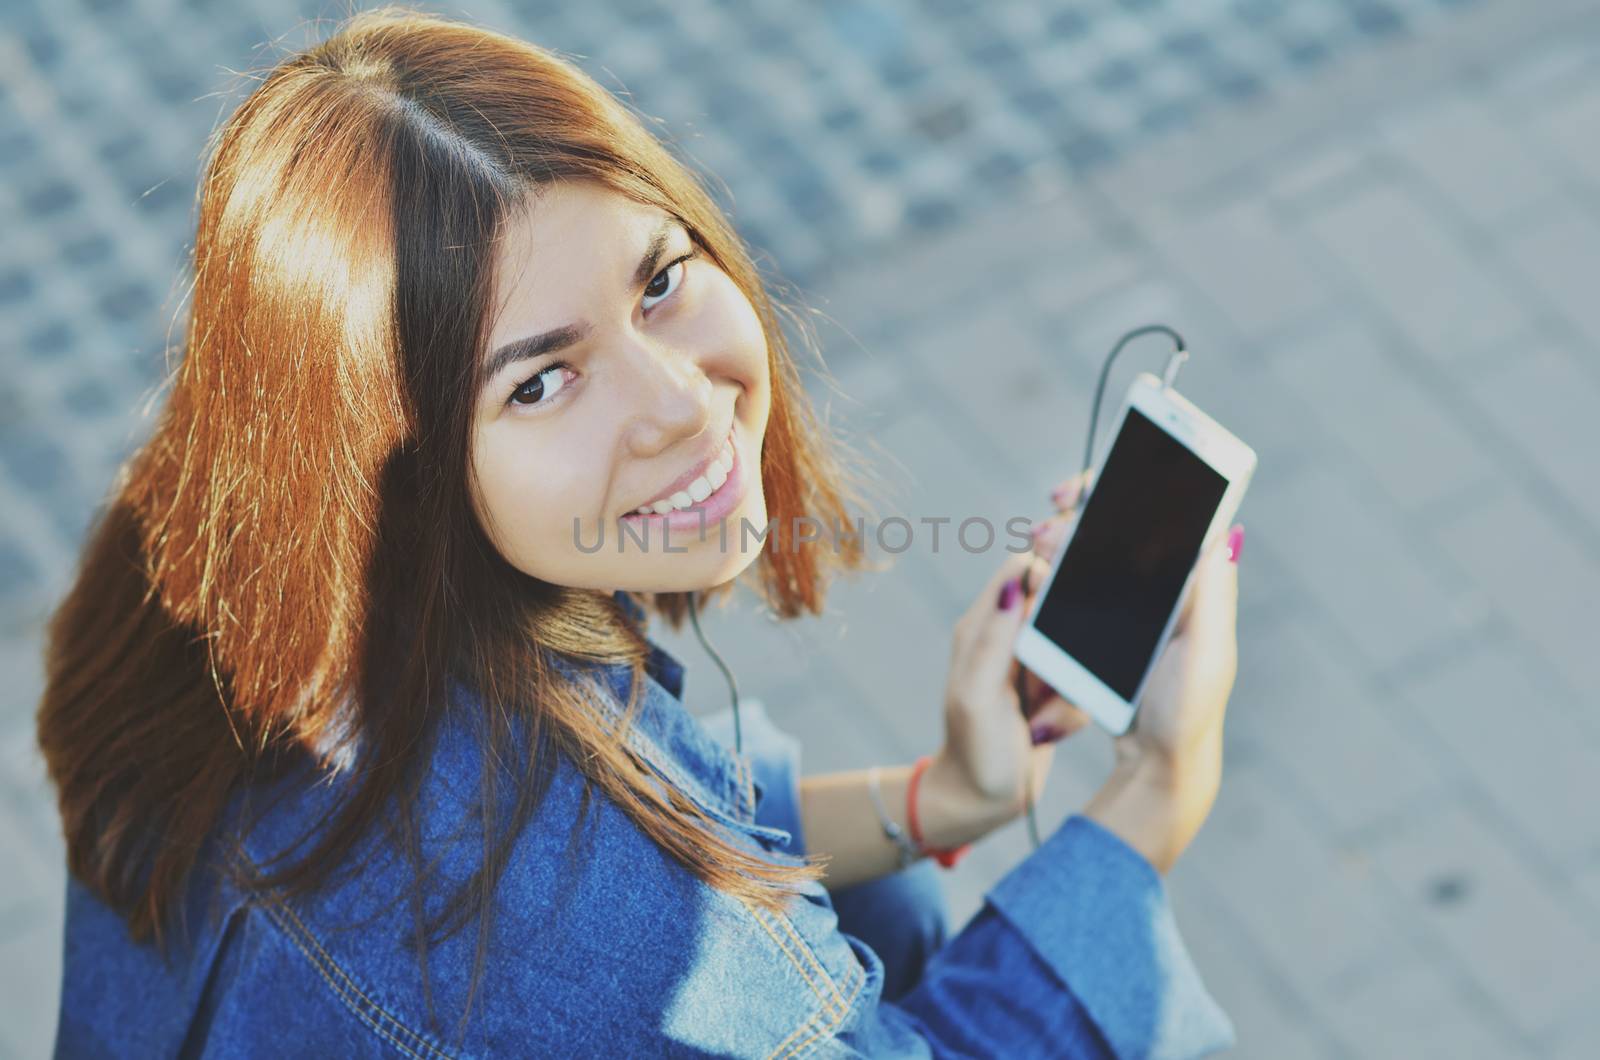 The student sits on a bench and listens to music on the phone with headphones, looks at the camera smiling, Asian appearance